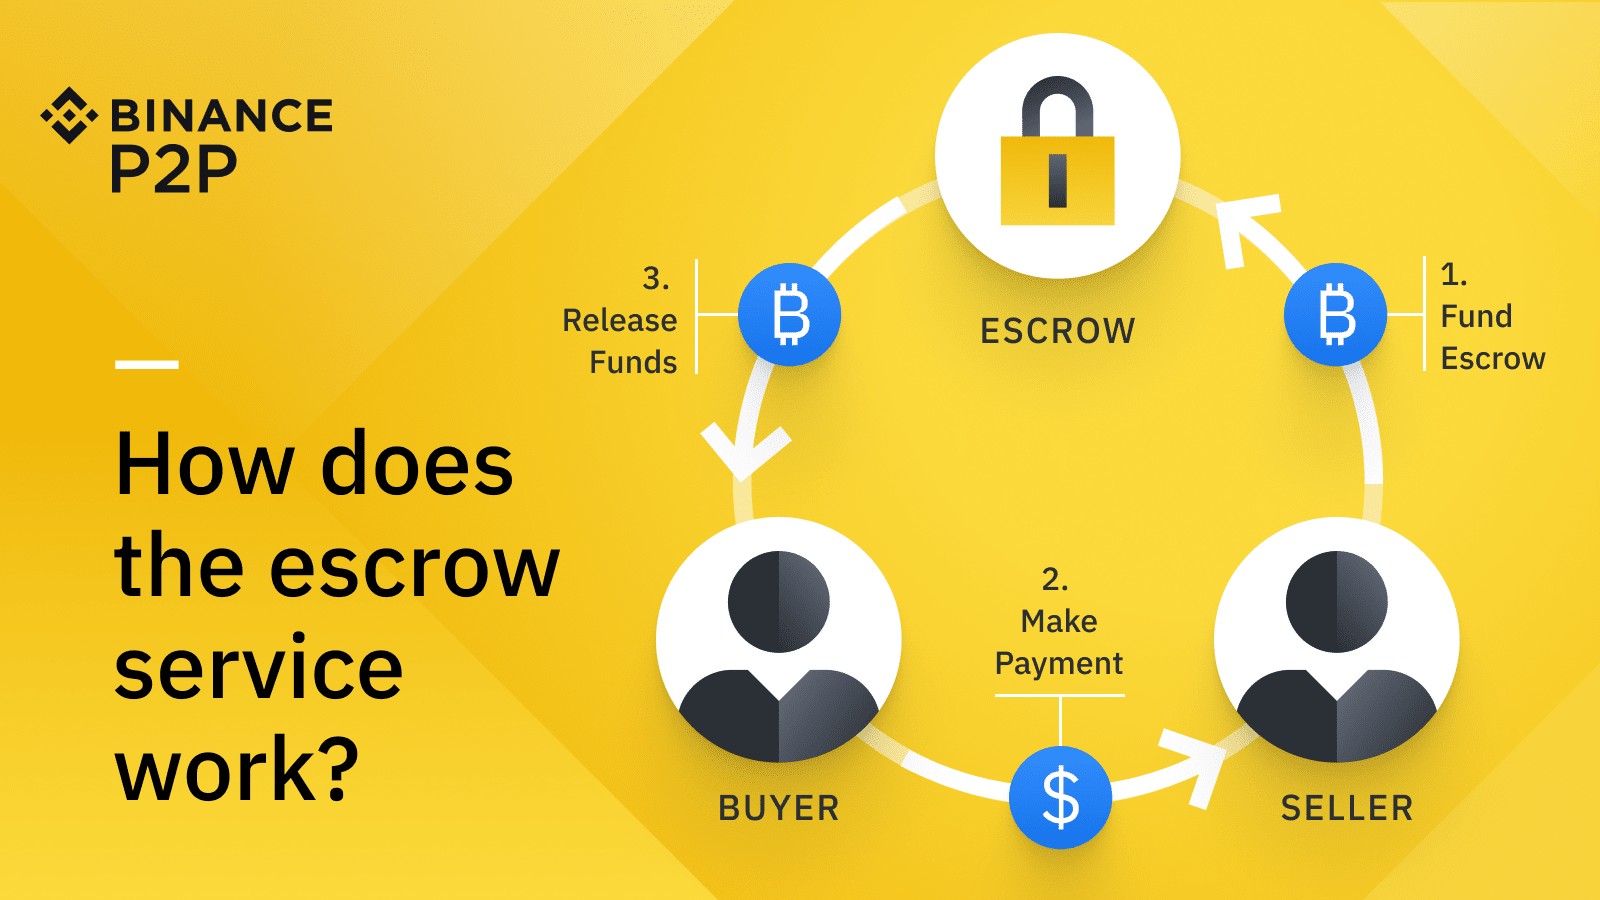 How Does Binance P2P’s Escrow Service Work?